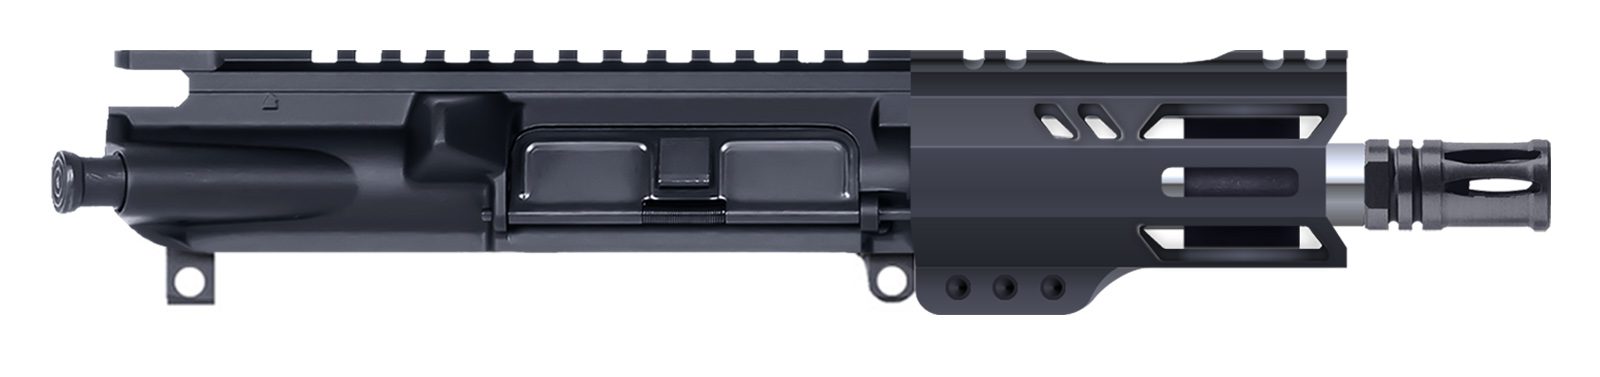 ar15-micro-upper-assembly